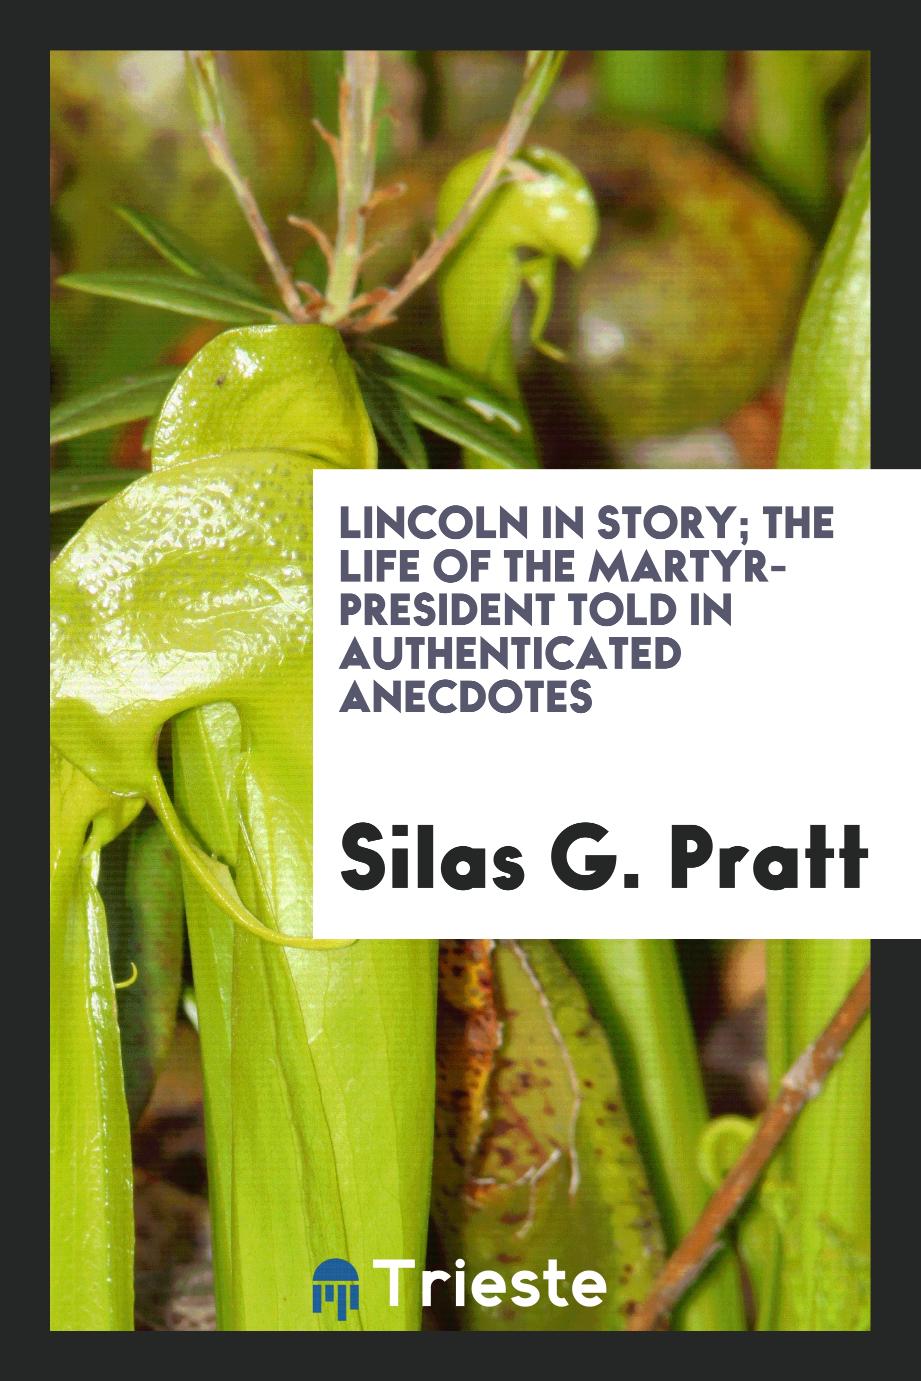 Lincoln in story; the life of the martyr-president told in authenticated anecdotes